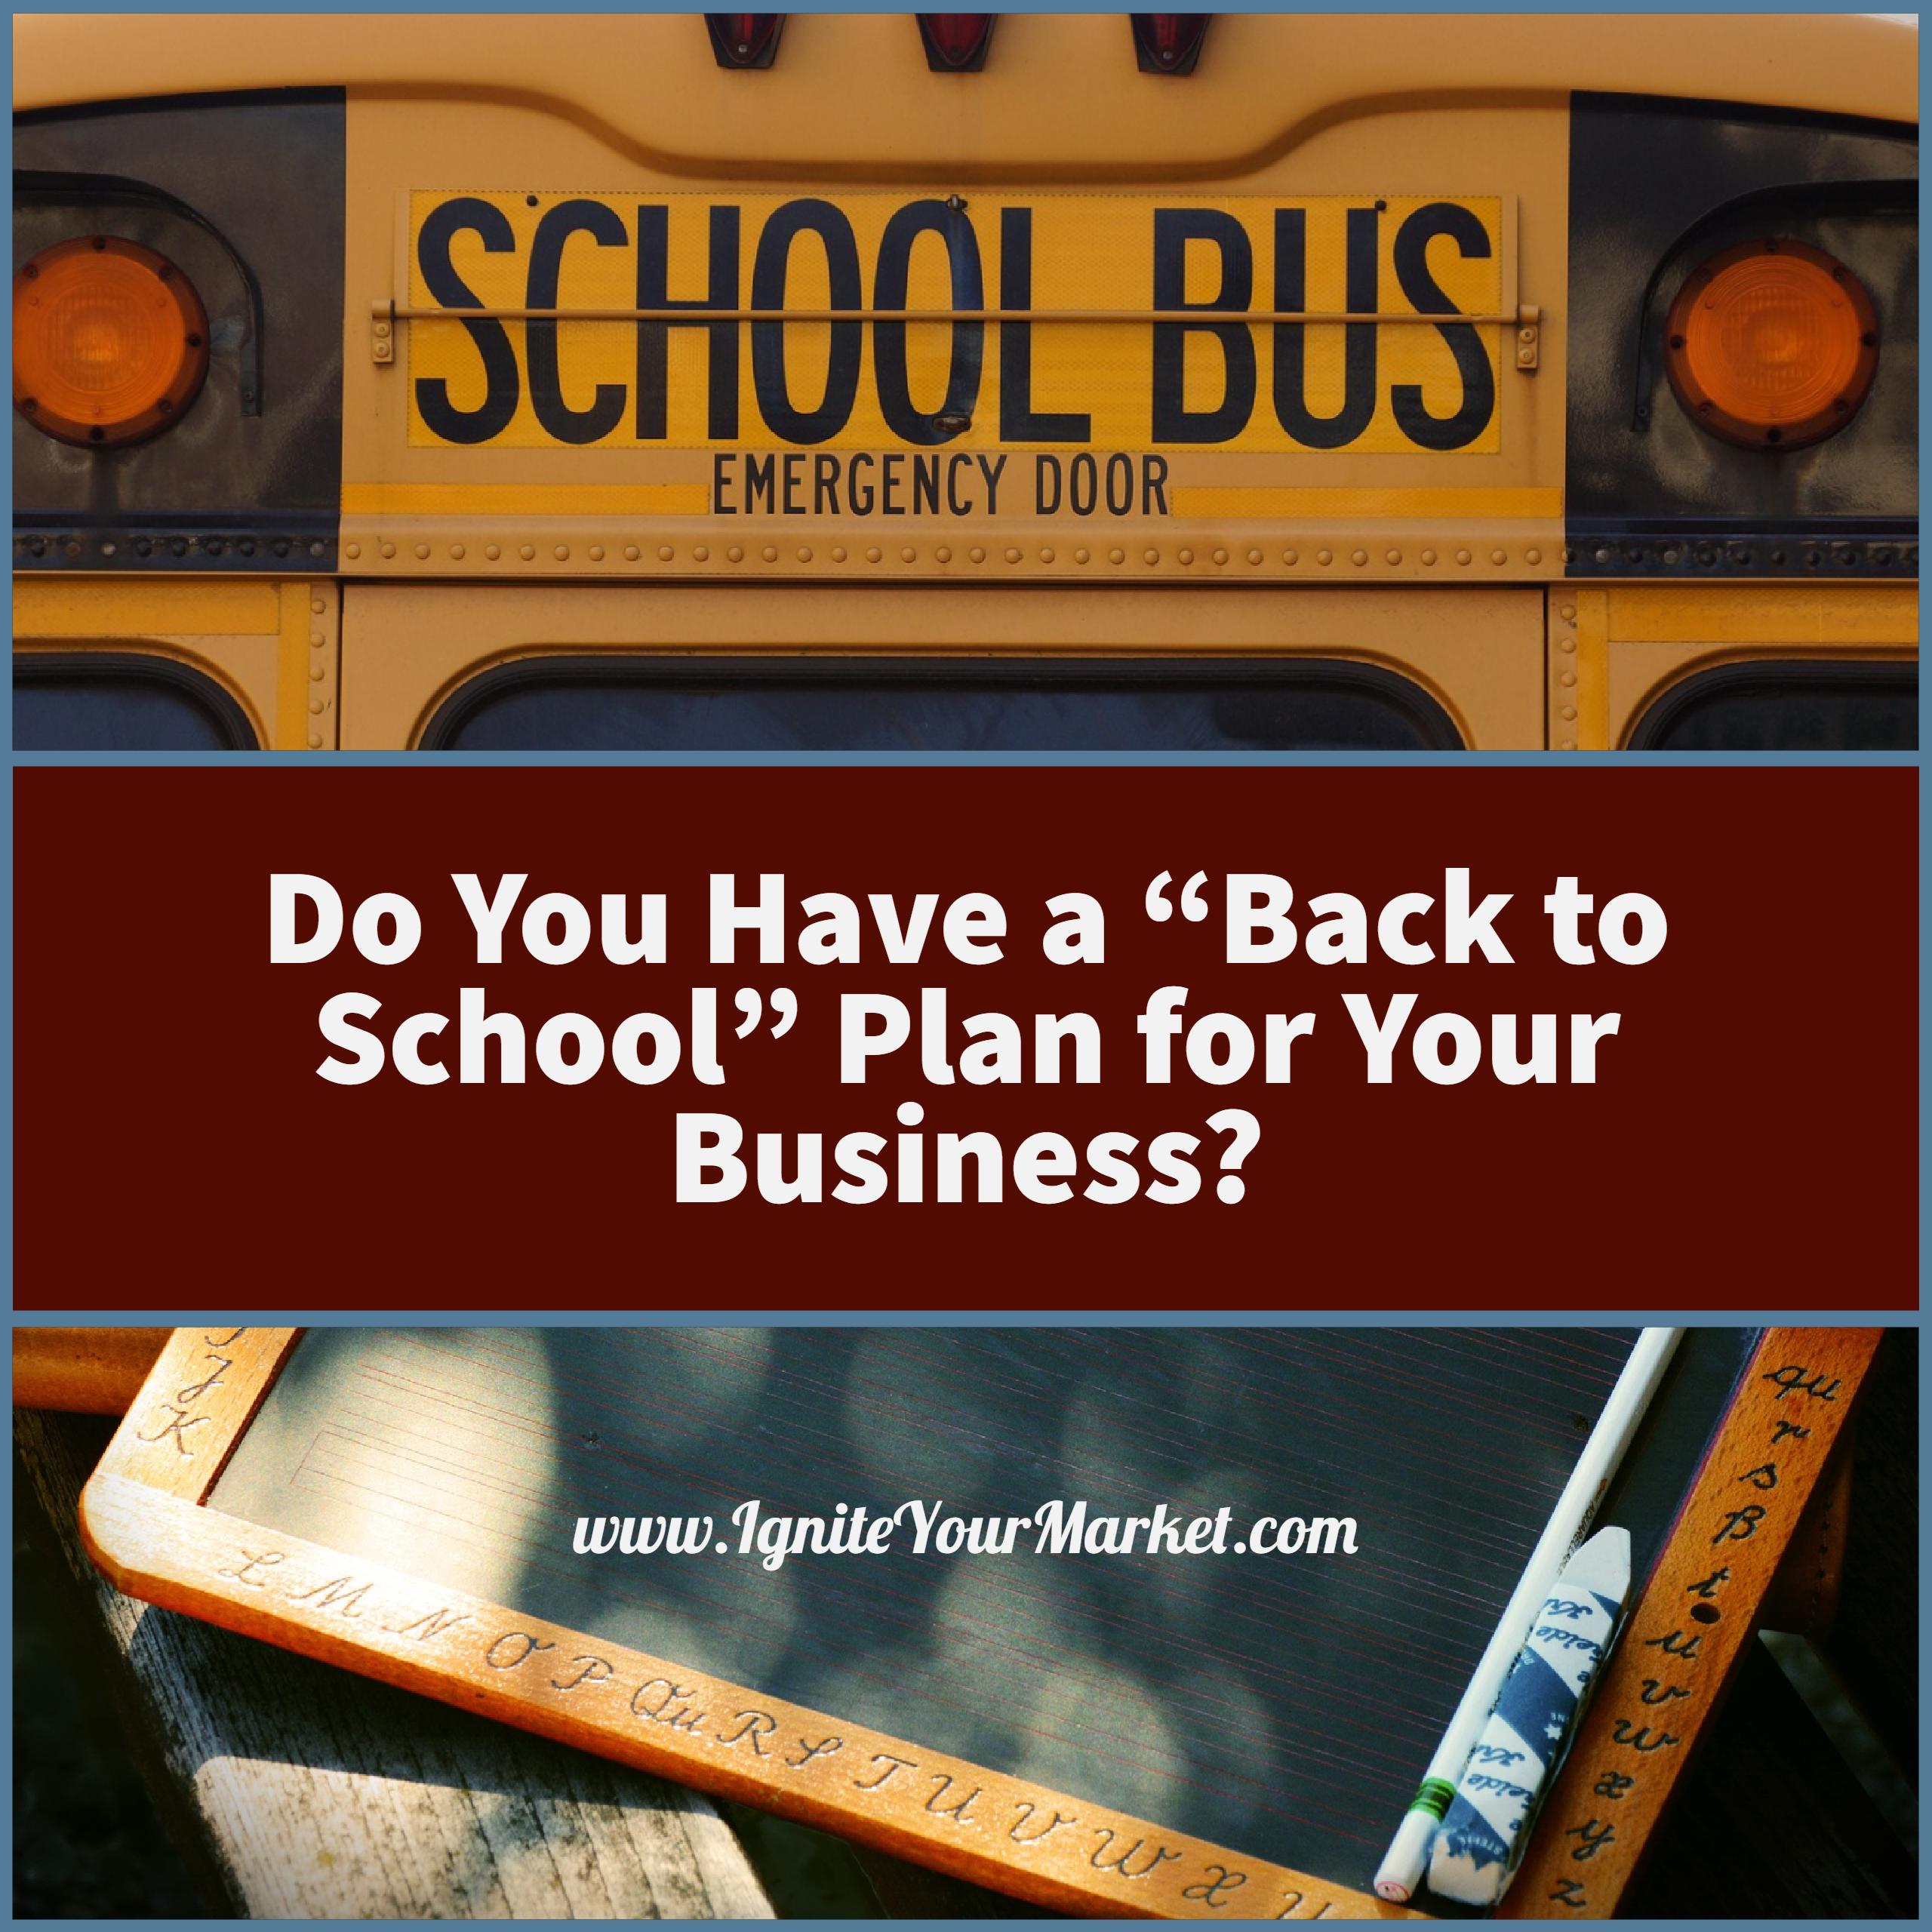 Do You Have a “Back to School” Plan for Your Business?